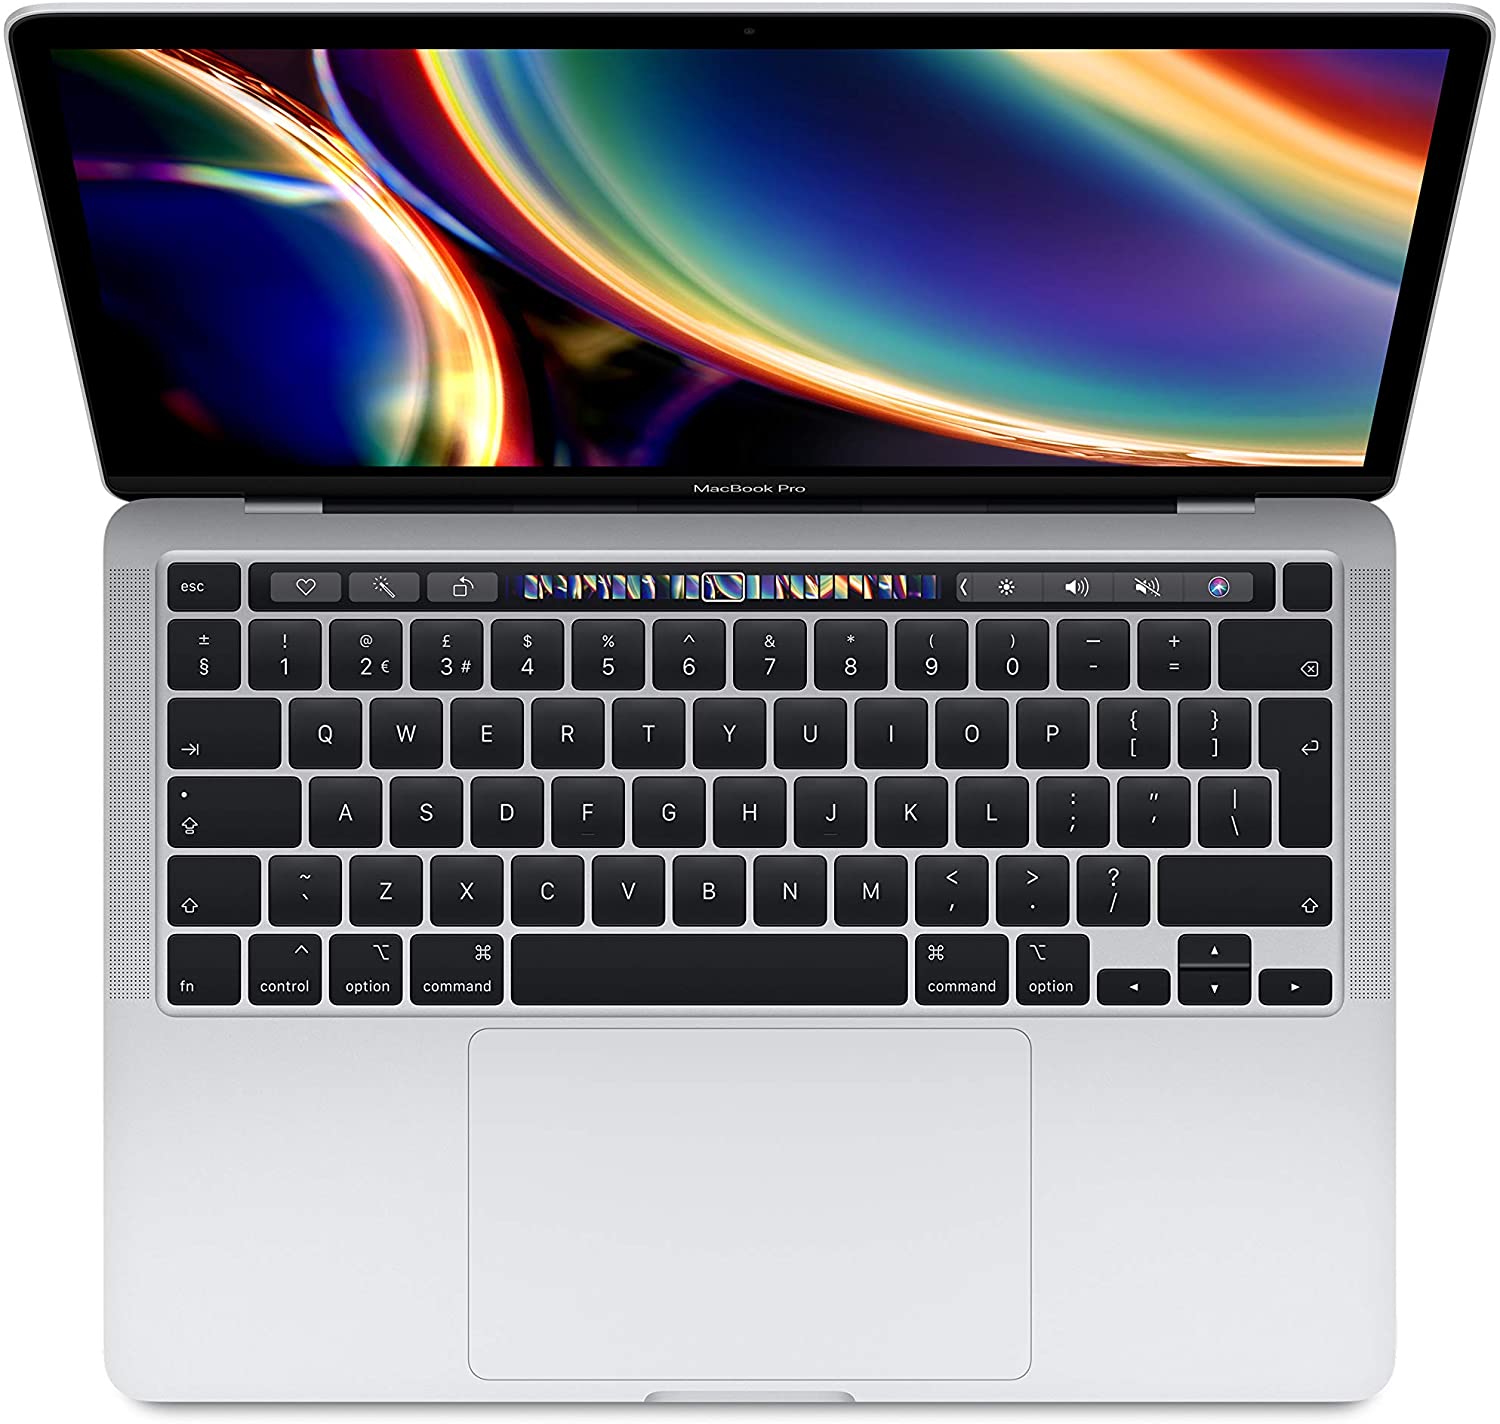 MacBook Pro 13-inch with Touch Bar and Touch ID (2020) – Core i5 1.4GHz 8GB 1TB - Silver